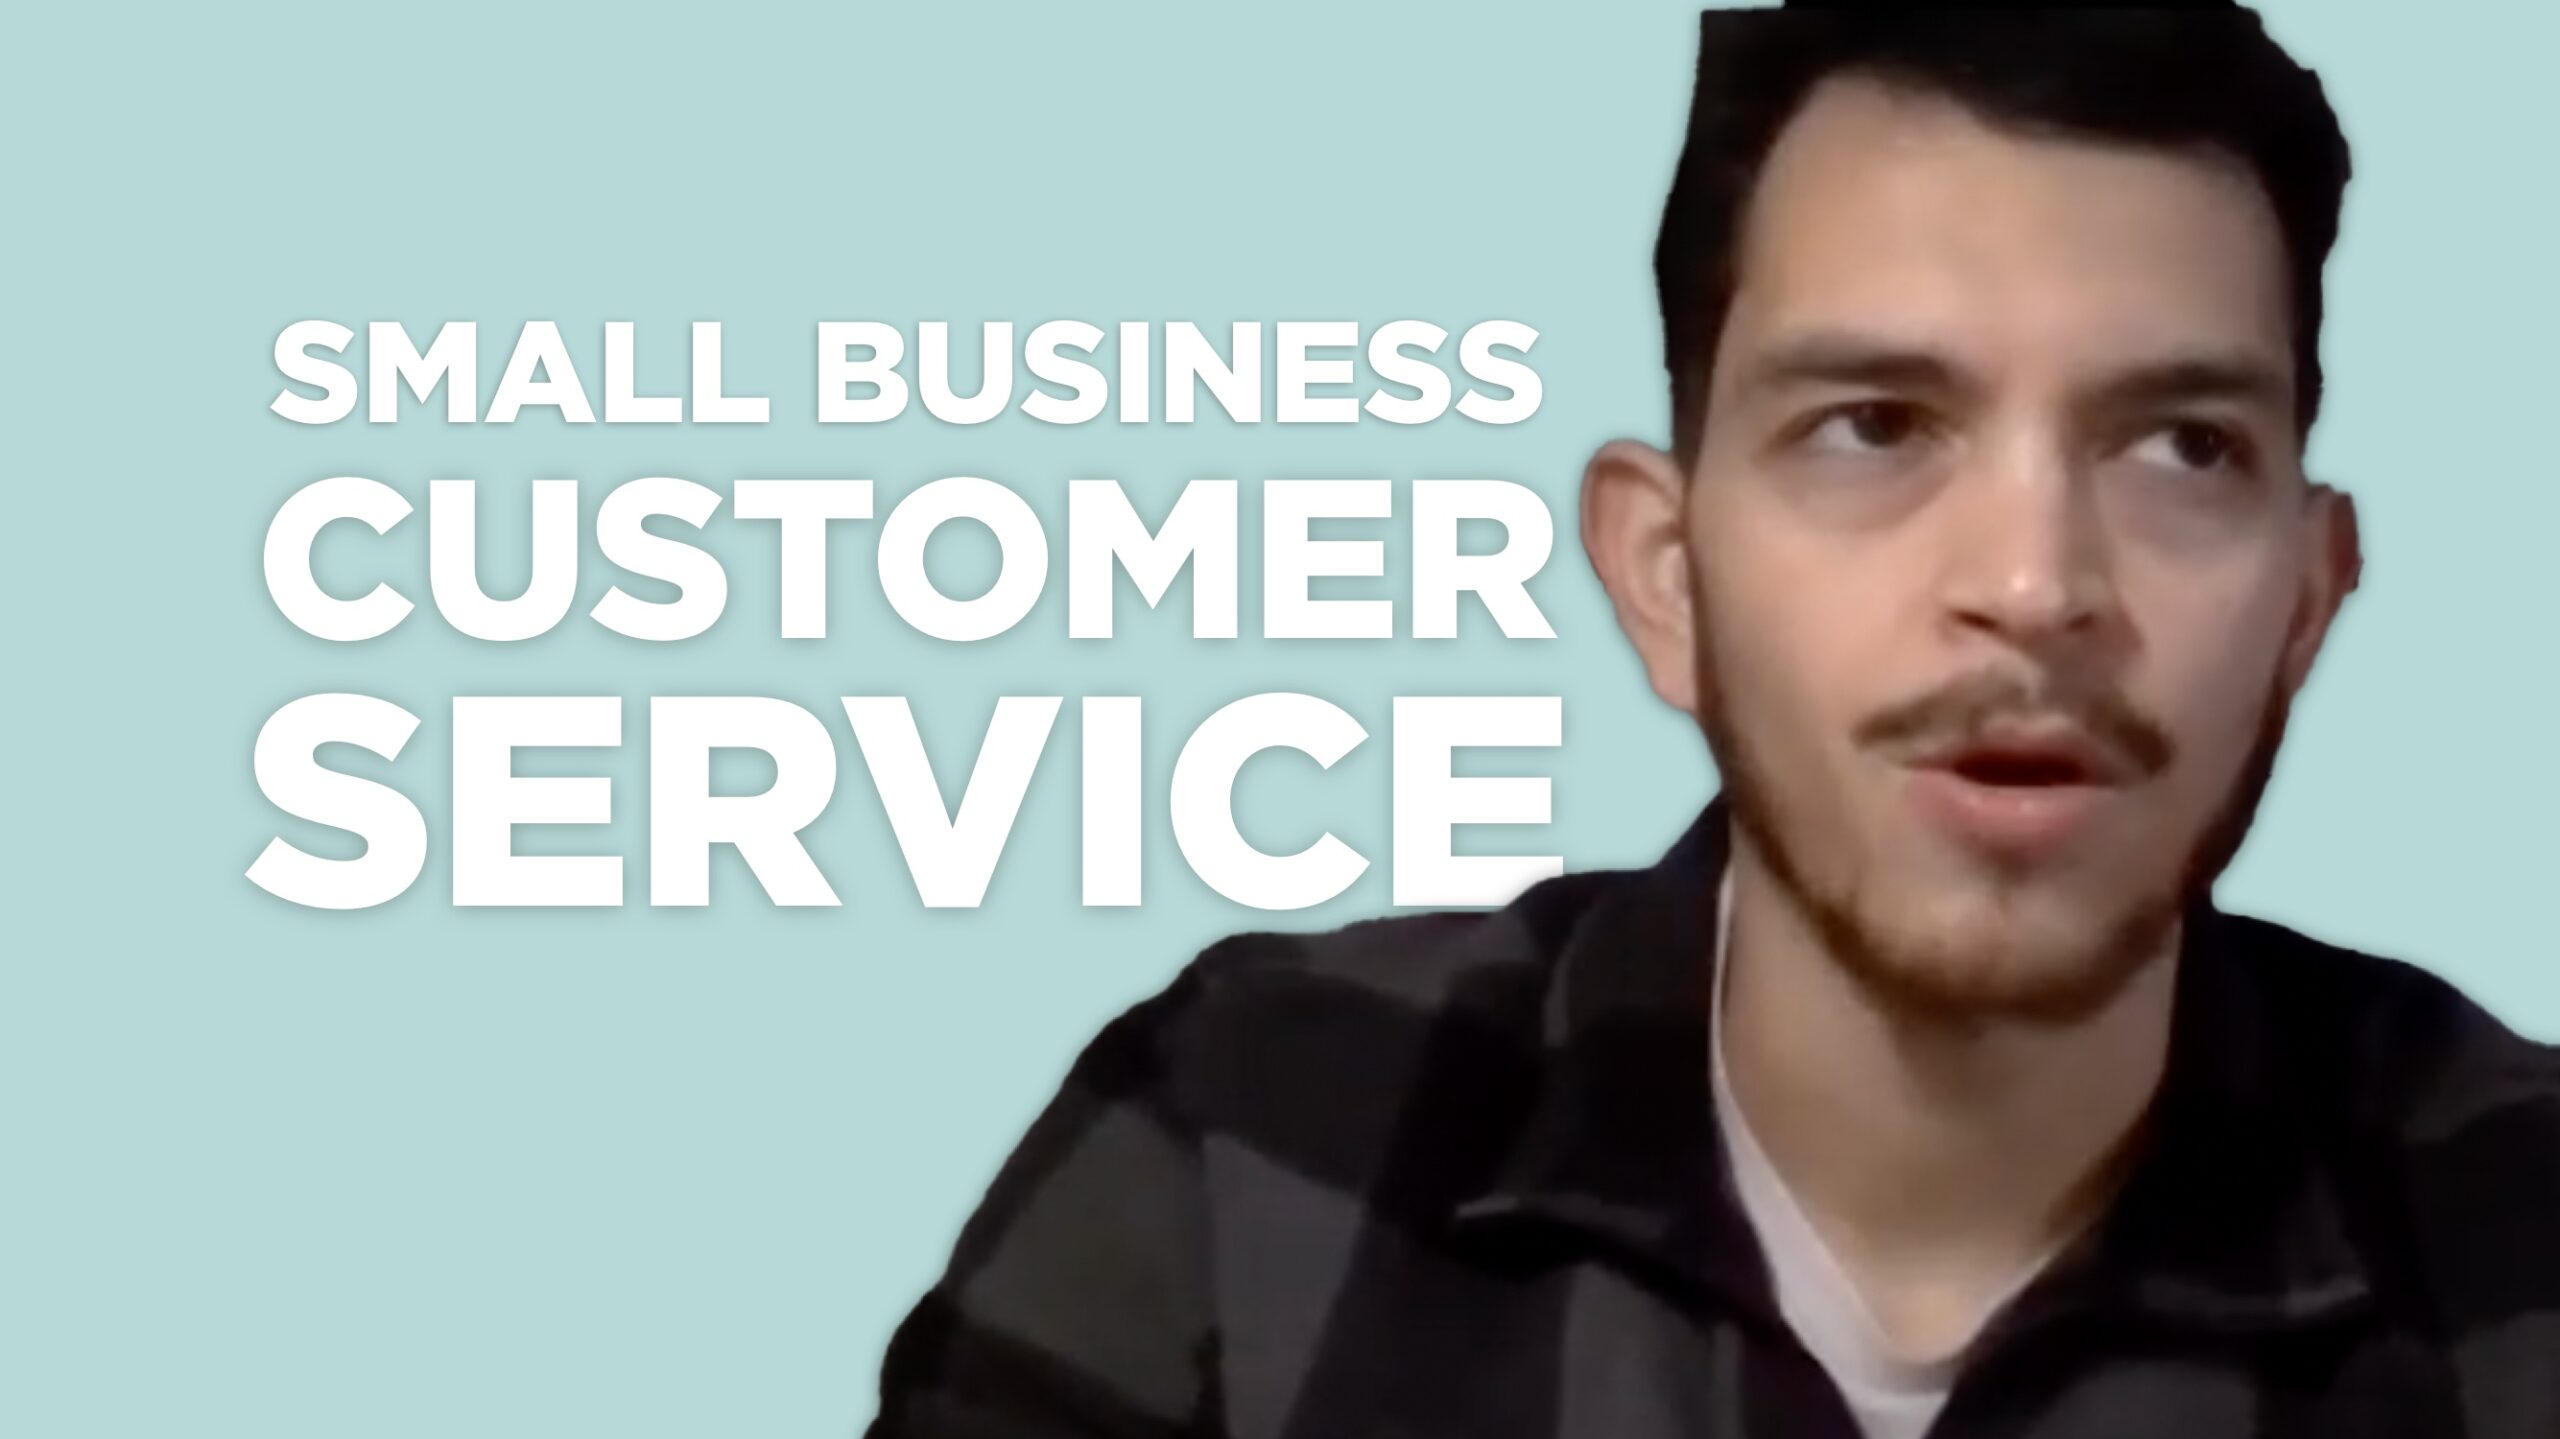 193 – Small Business Customer Service: Key Components for Success with Hector Castaneda